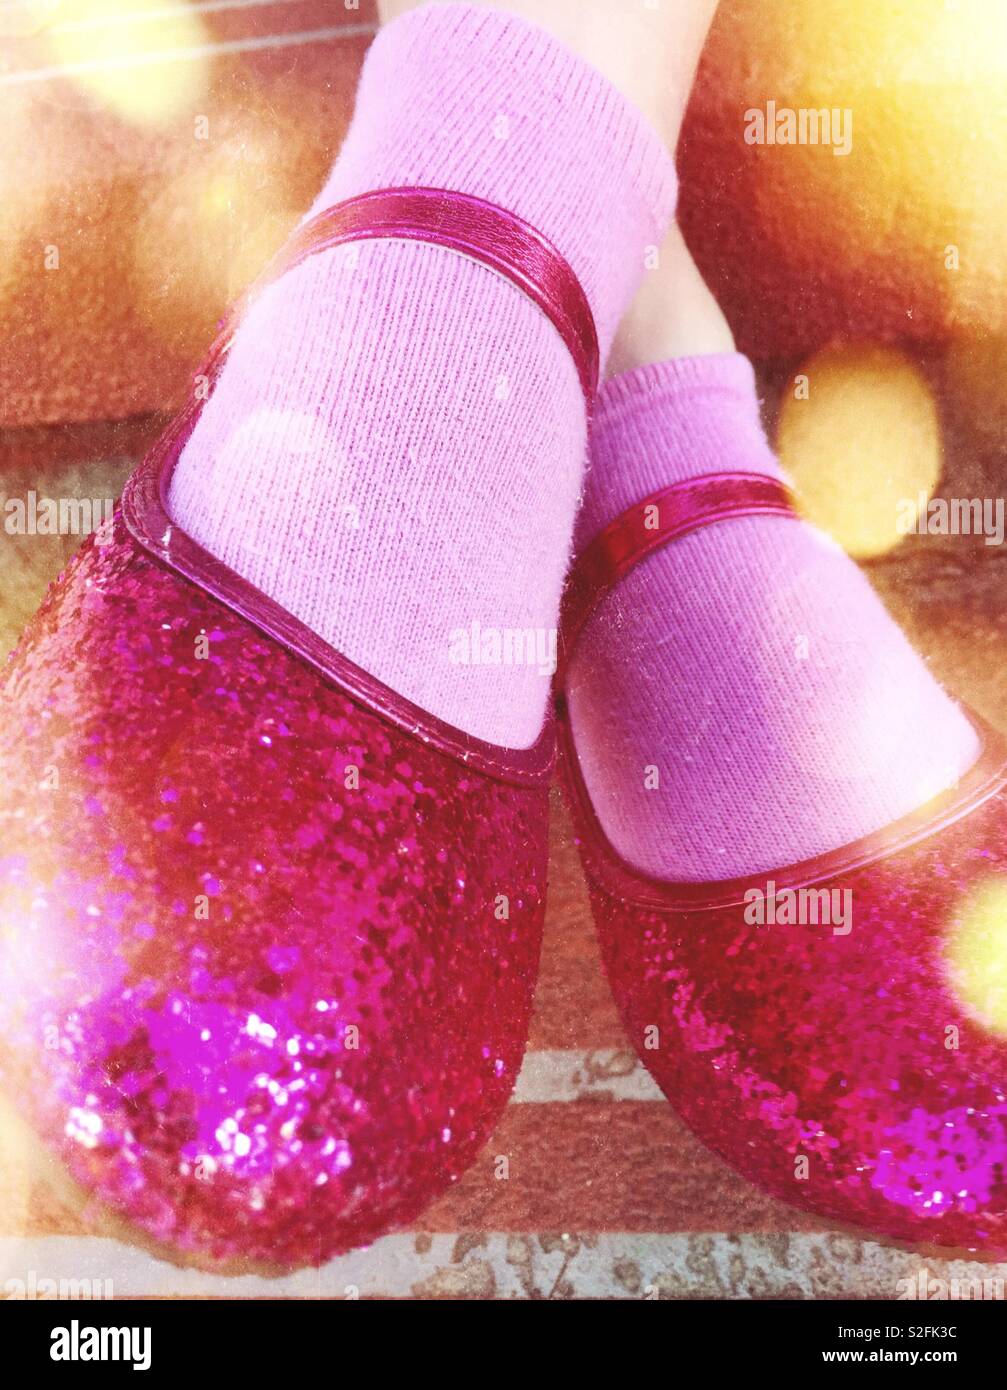 Closeup pink glittery girls dance shoe with pink socks and lens flare.  Young girls pink dancer Stock Photo - Alamy